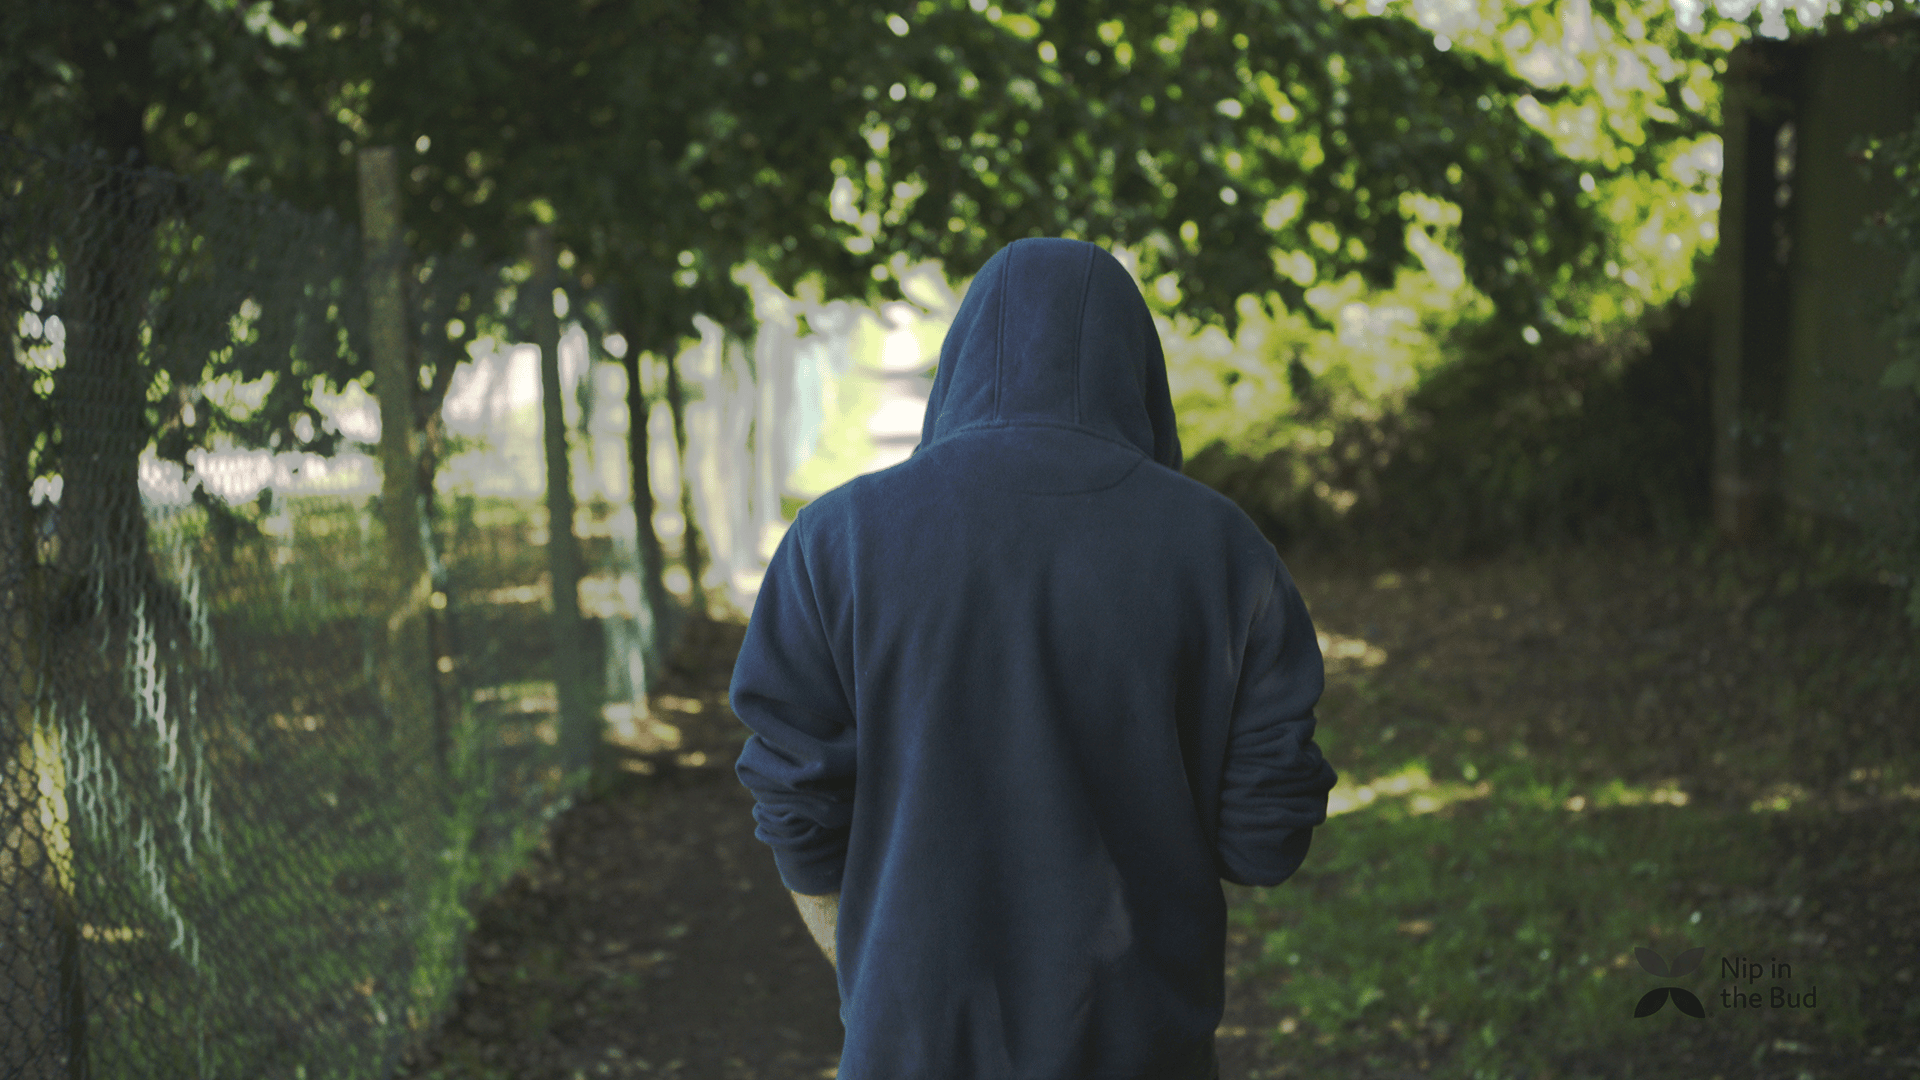 A young man wearing a hoodie is walking away through a tree lined path.